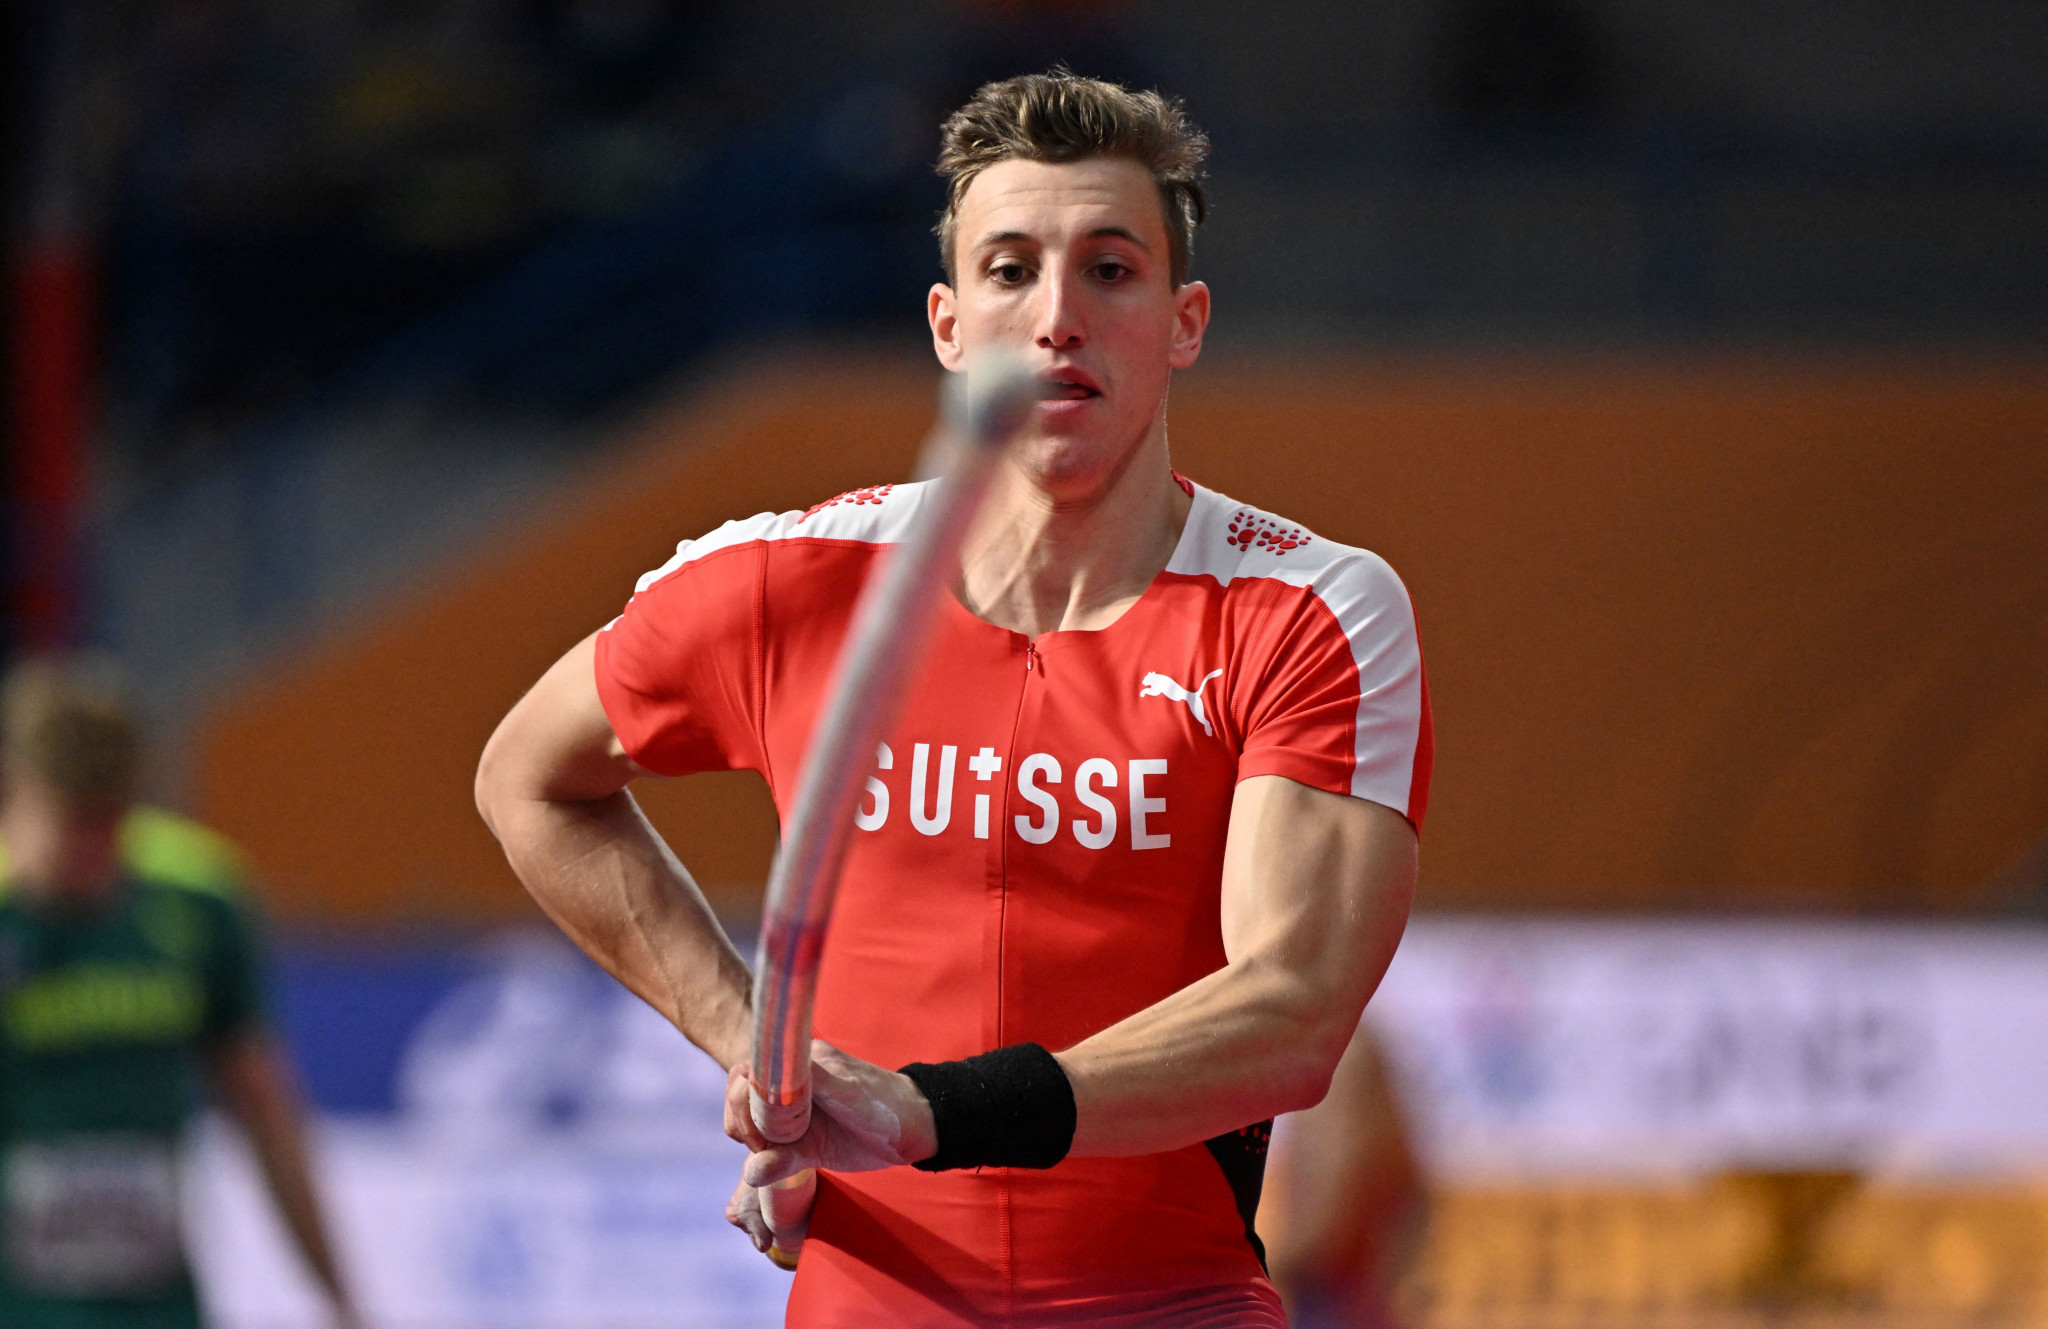 Ehammer and Weissenberg triumph at World Athletics Combined Events Tour Gold leg in Ratingen